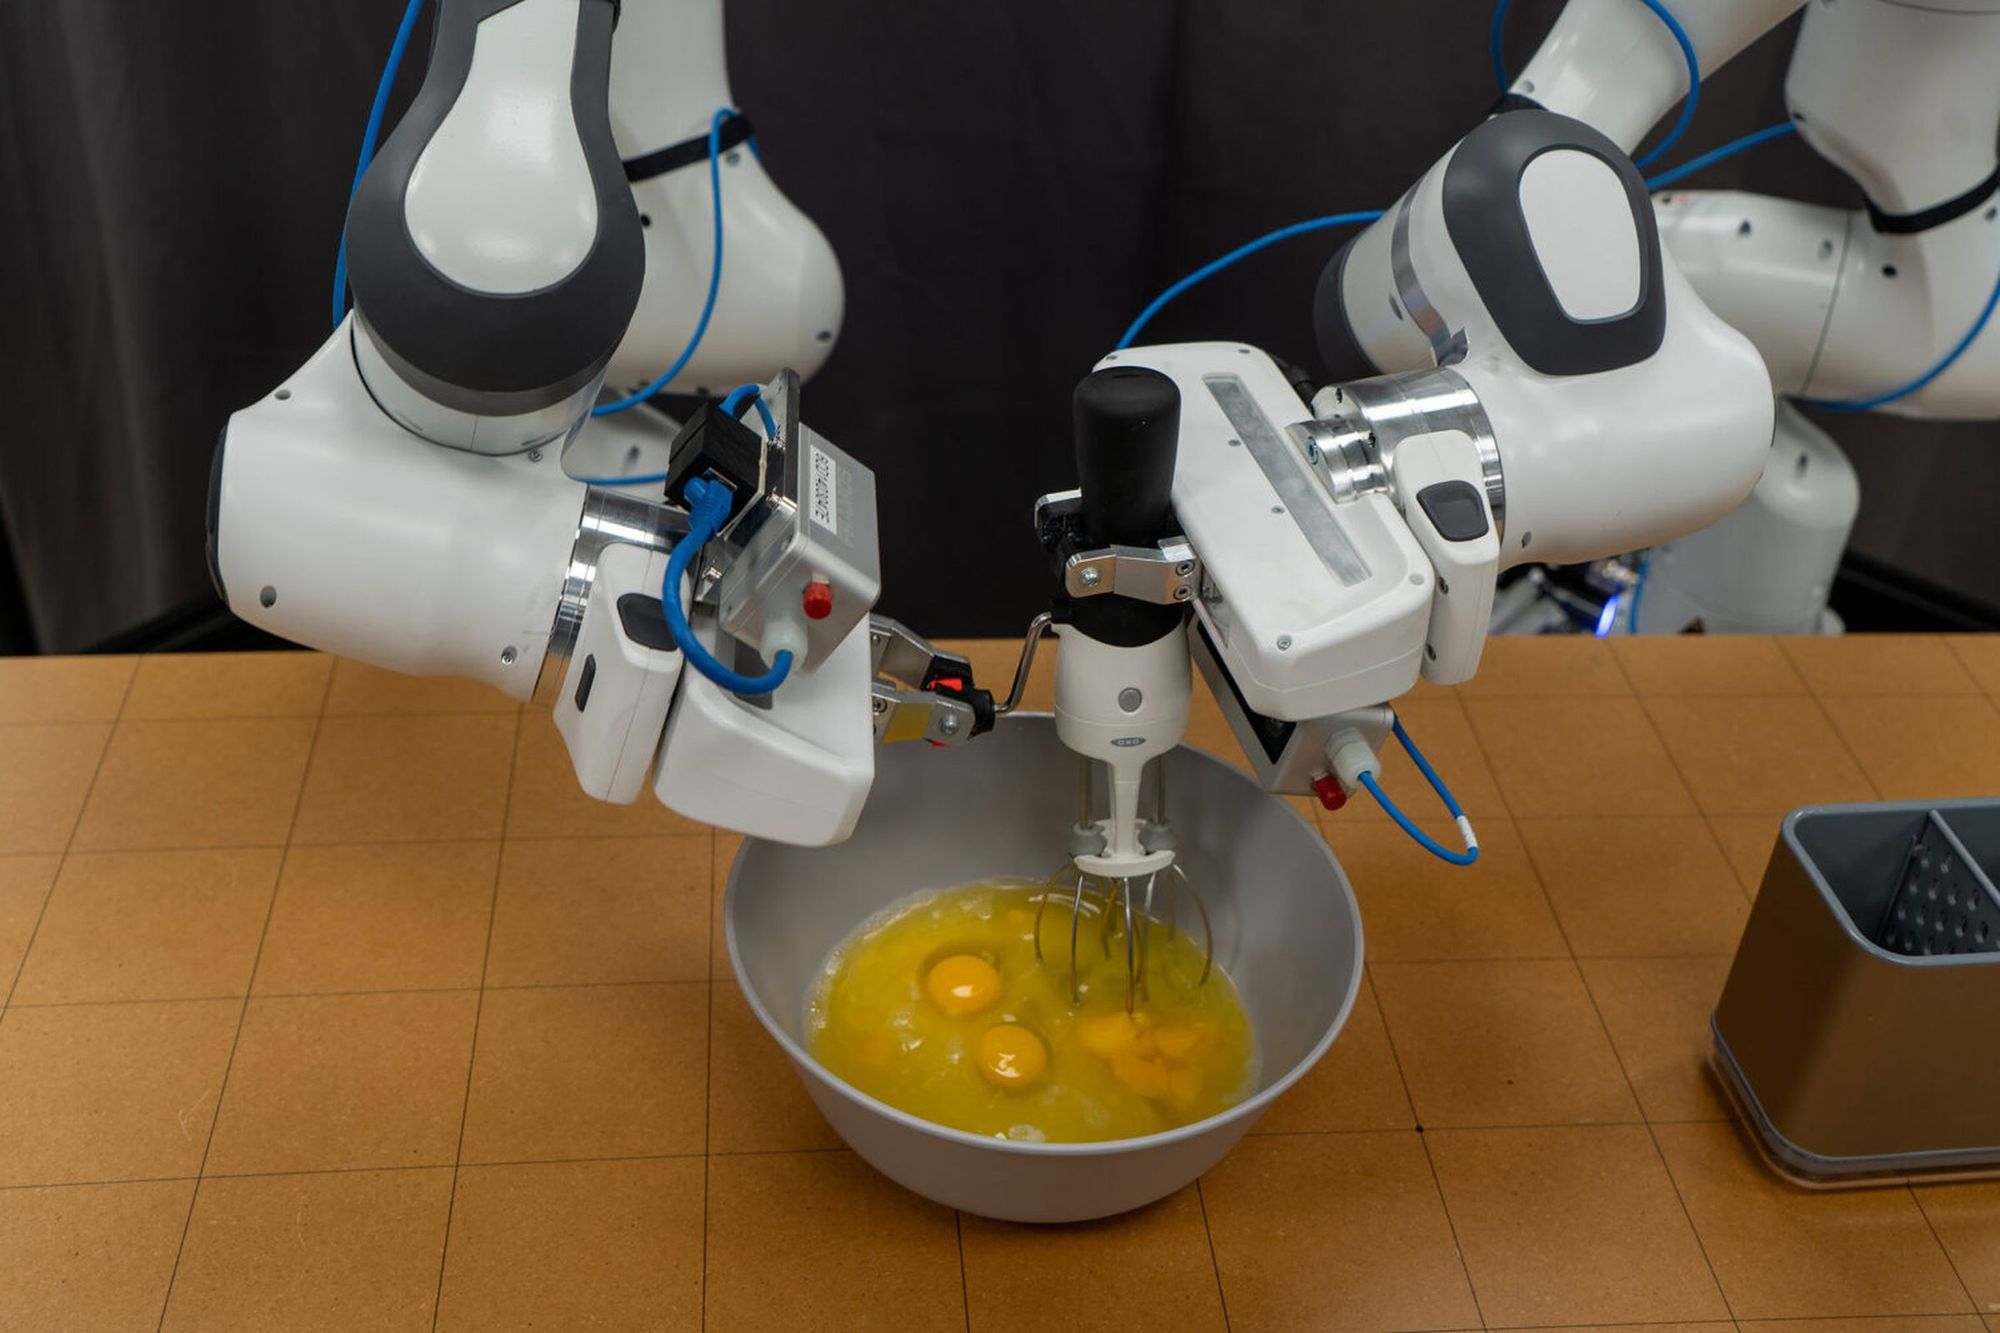 Toyota is making AI-trained breakfast bots in a ‘kindergarten for robots’ - The Verge